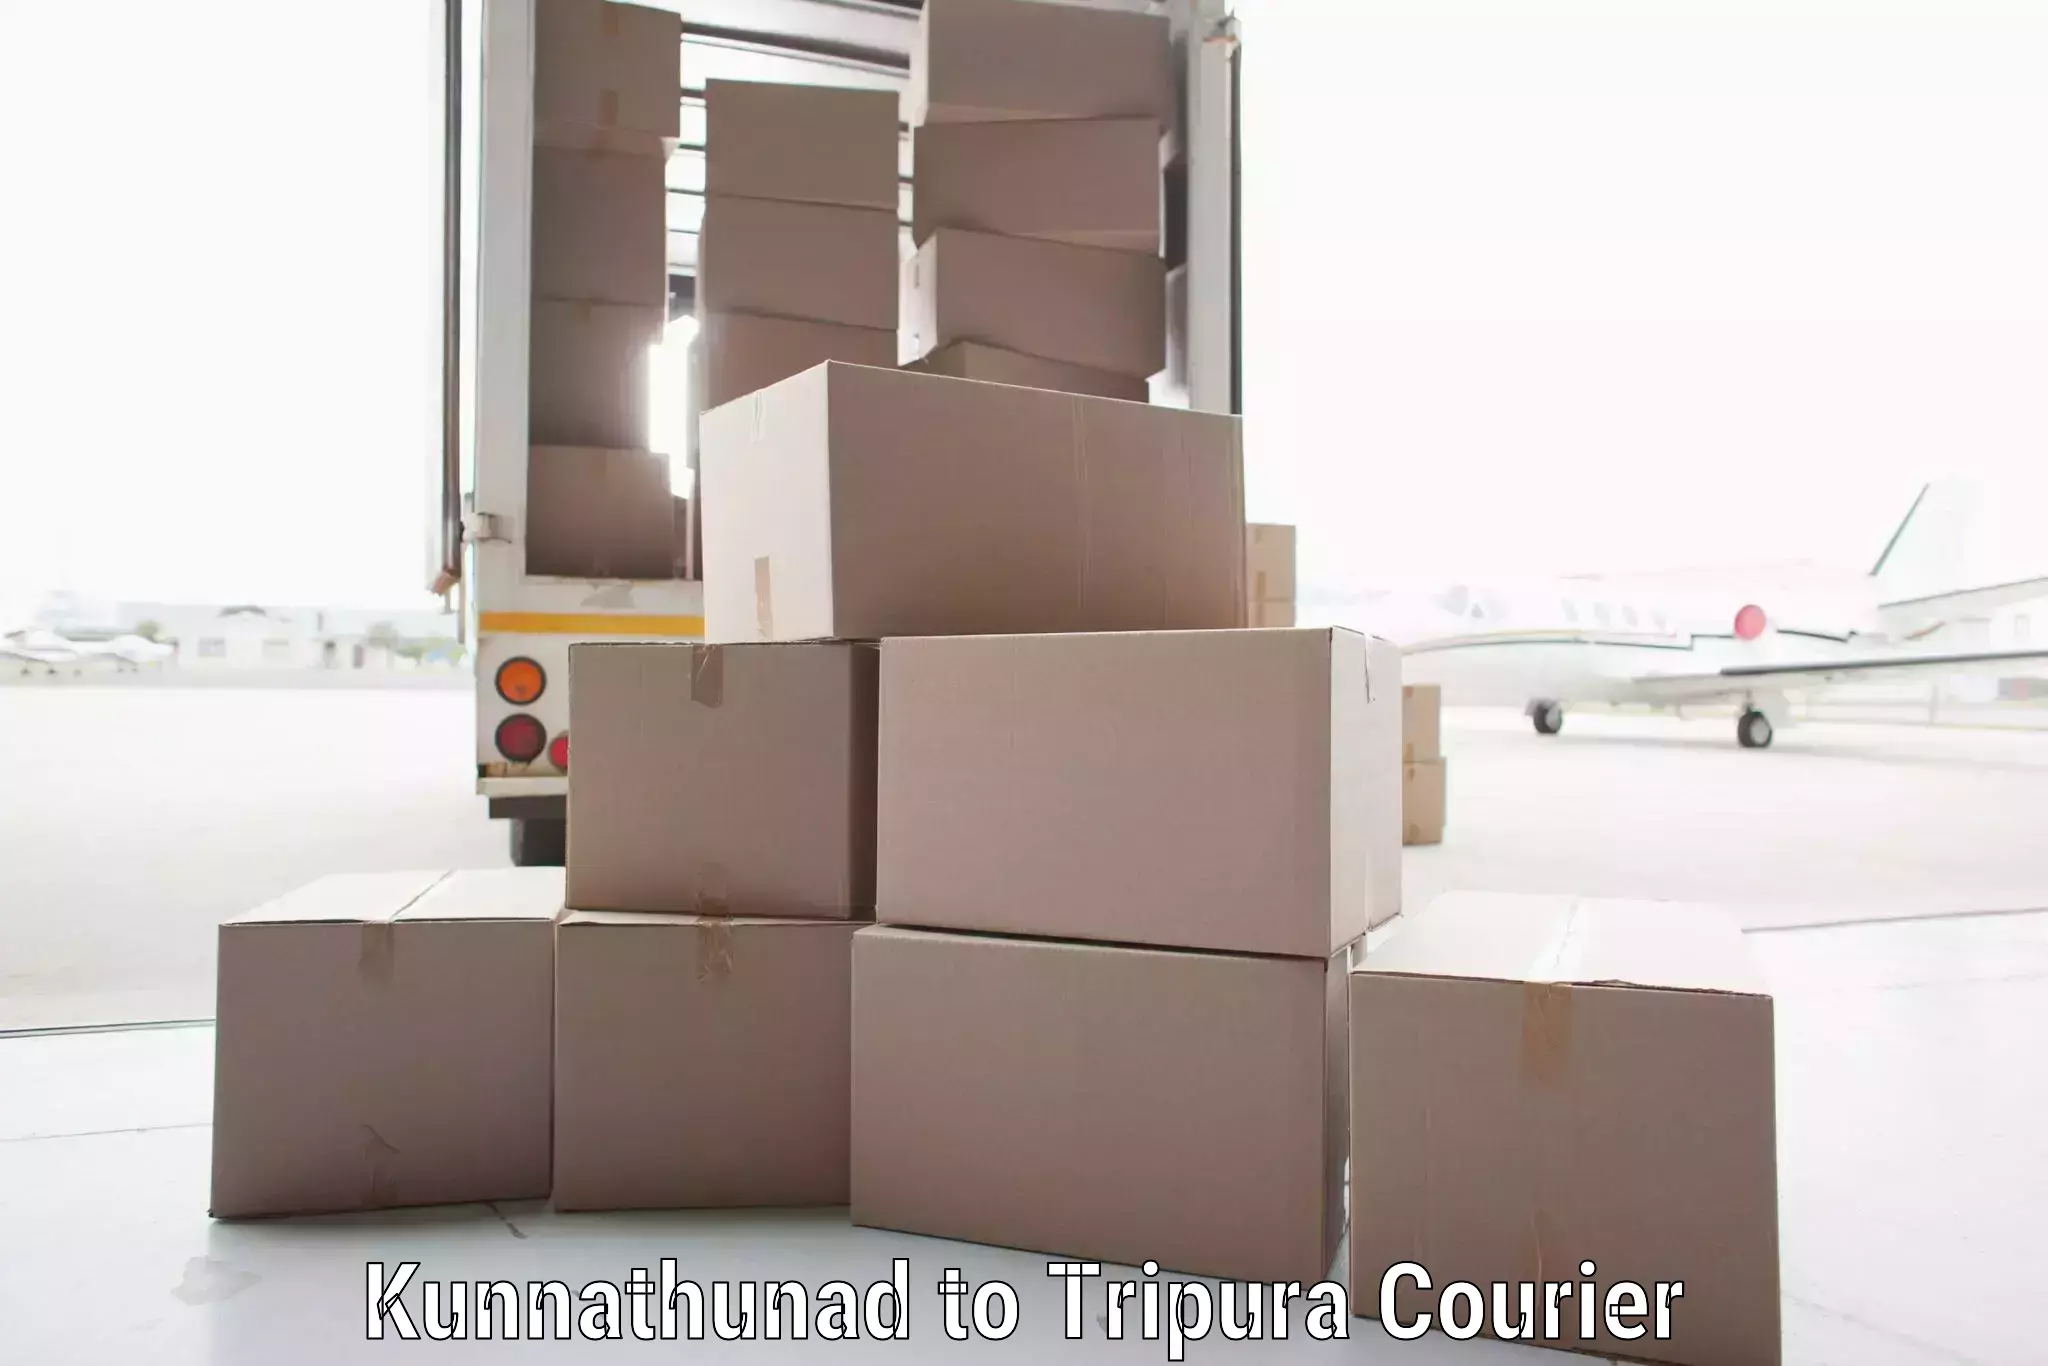 Rapid freight solutions in Kunnathunad to Udaipur Tripura